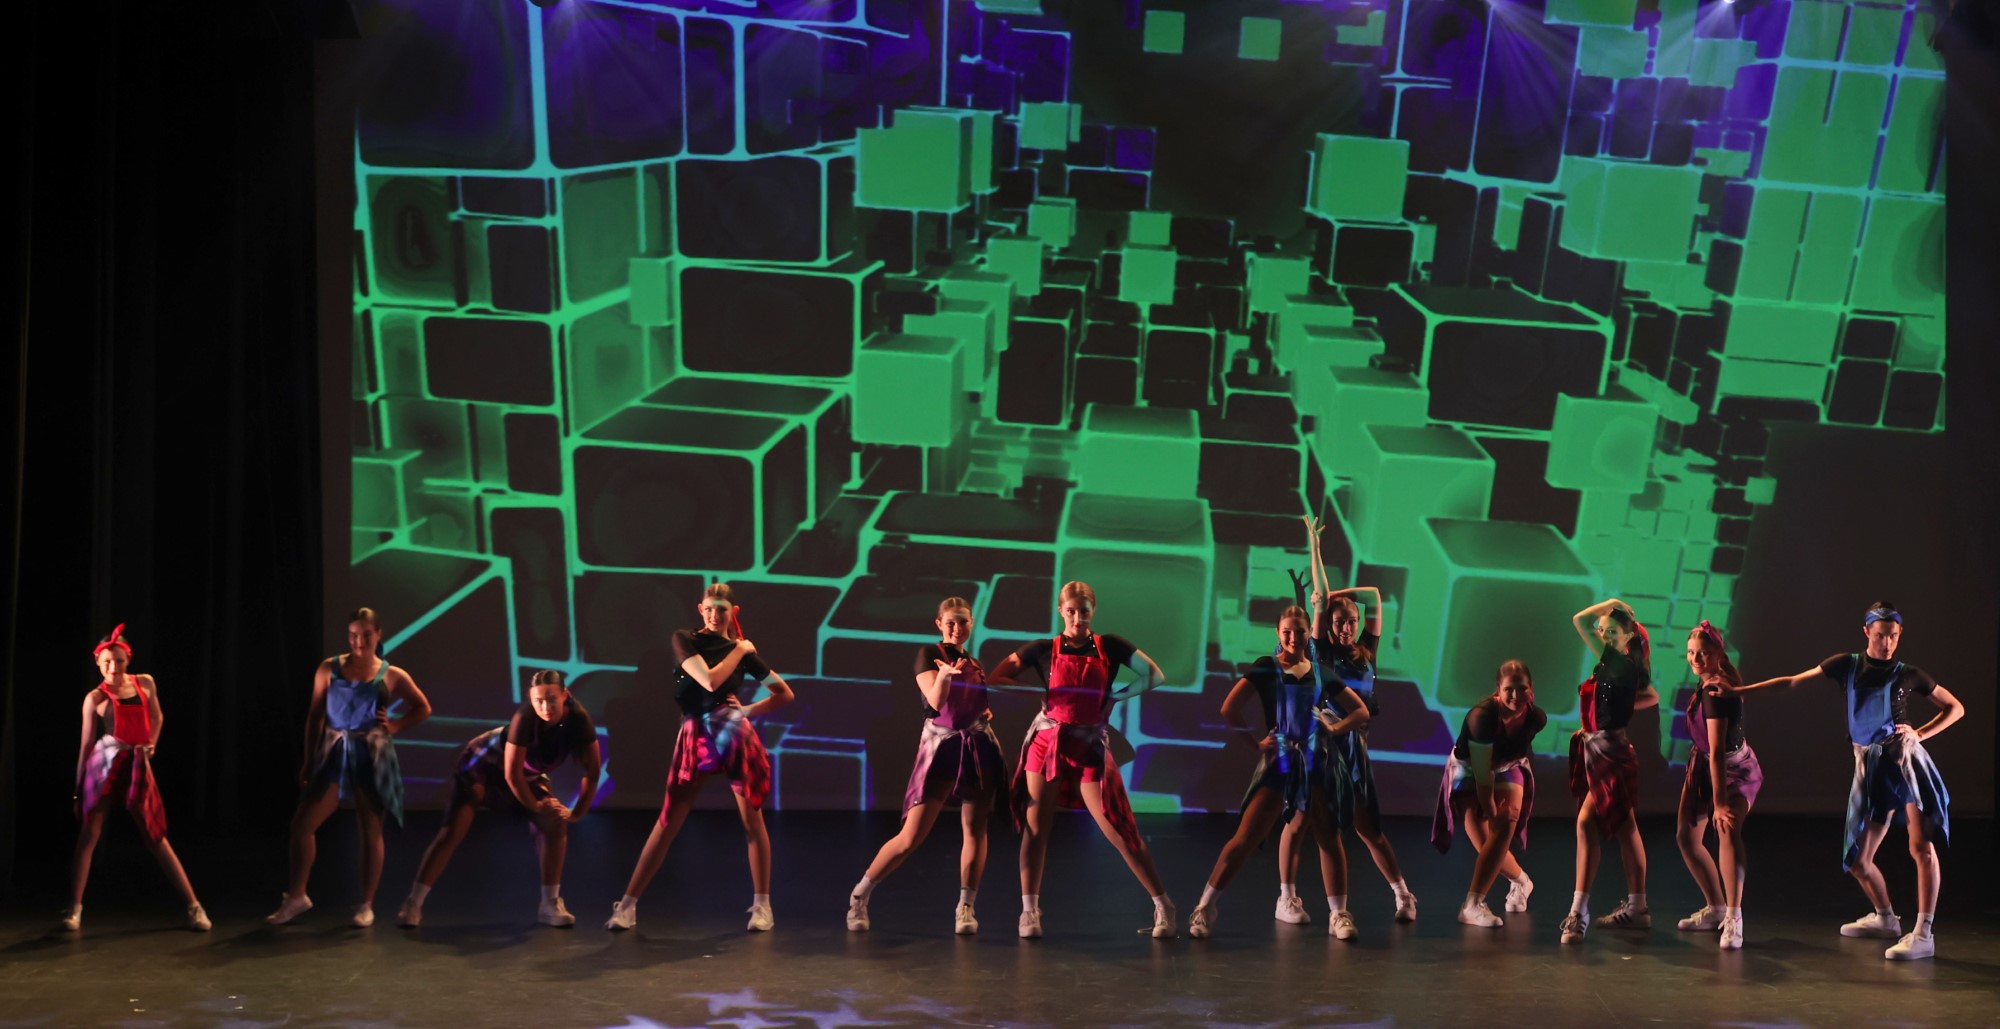 A high school dance performance with a colourful green background